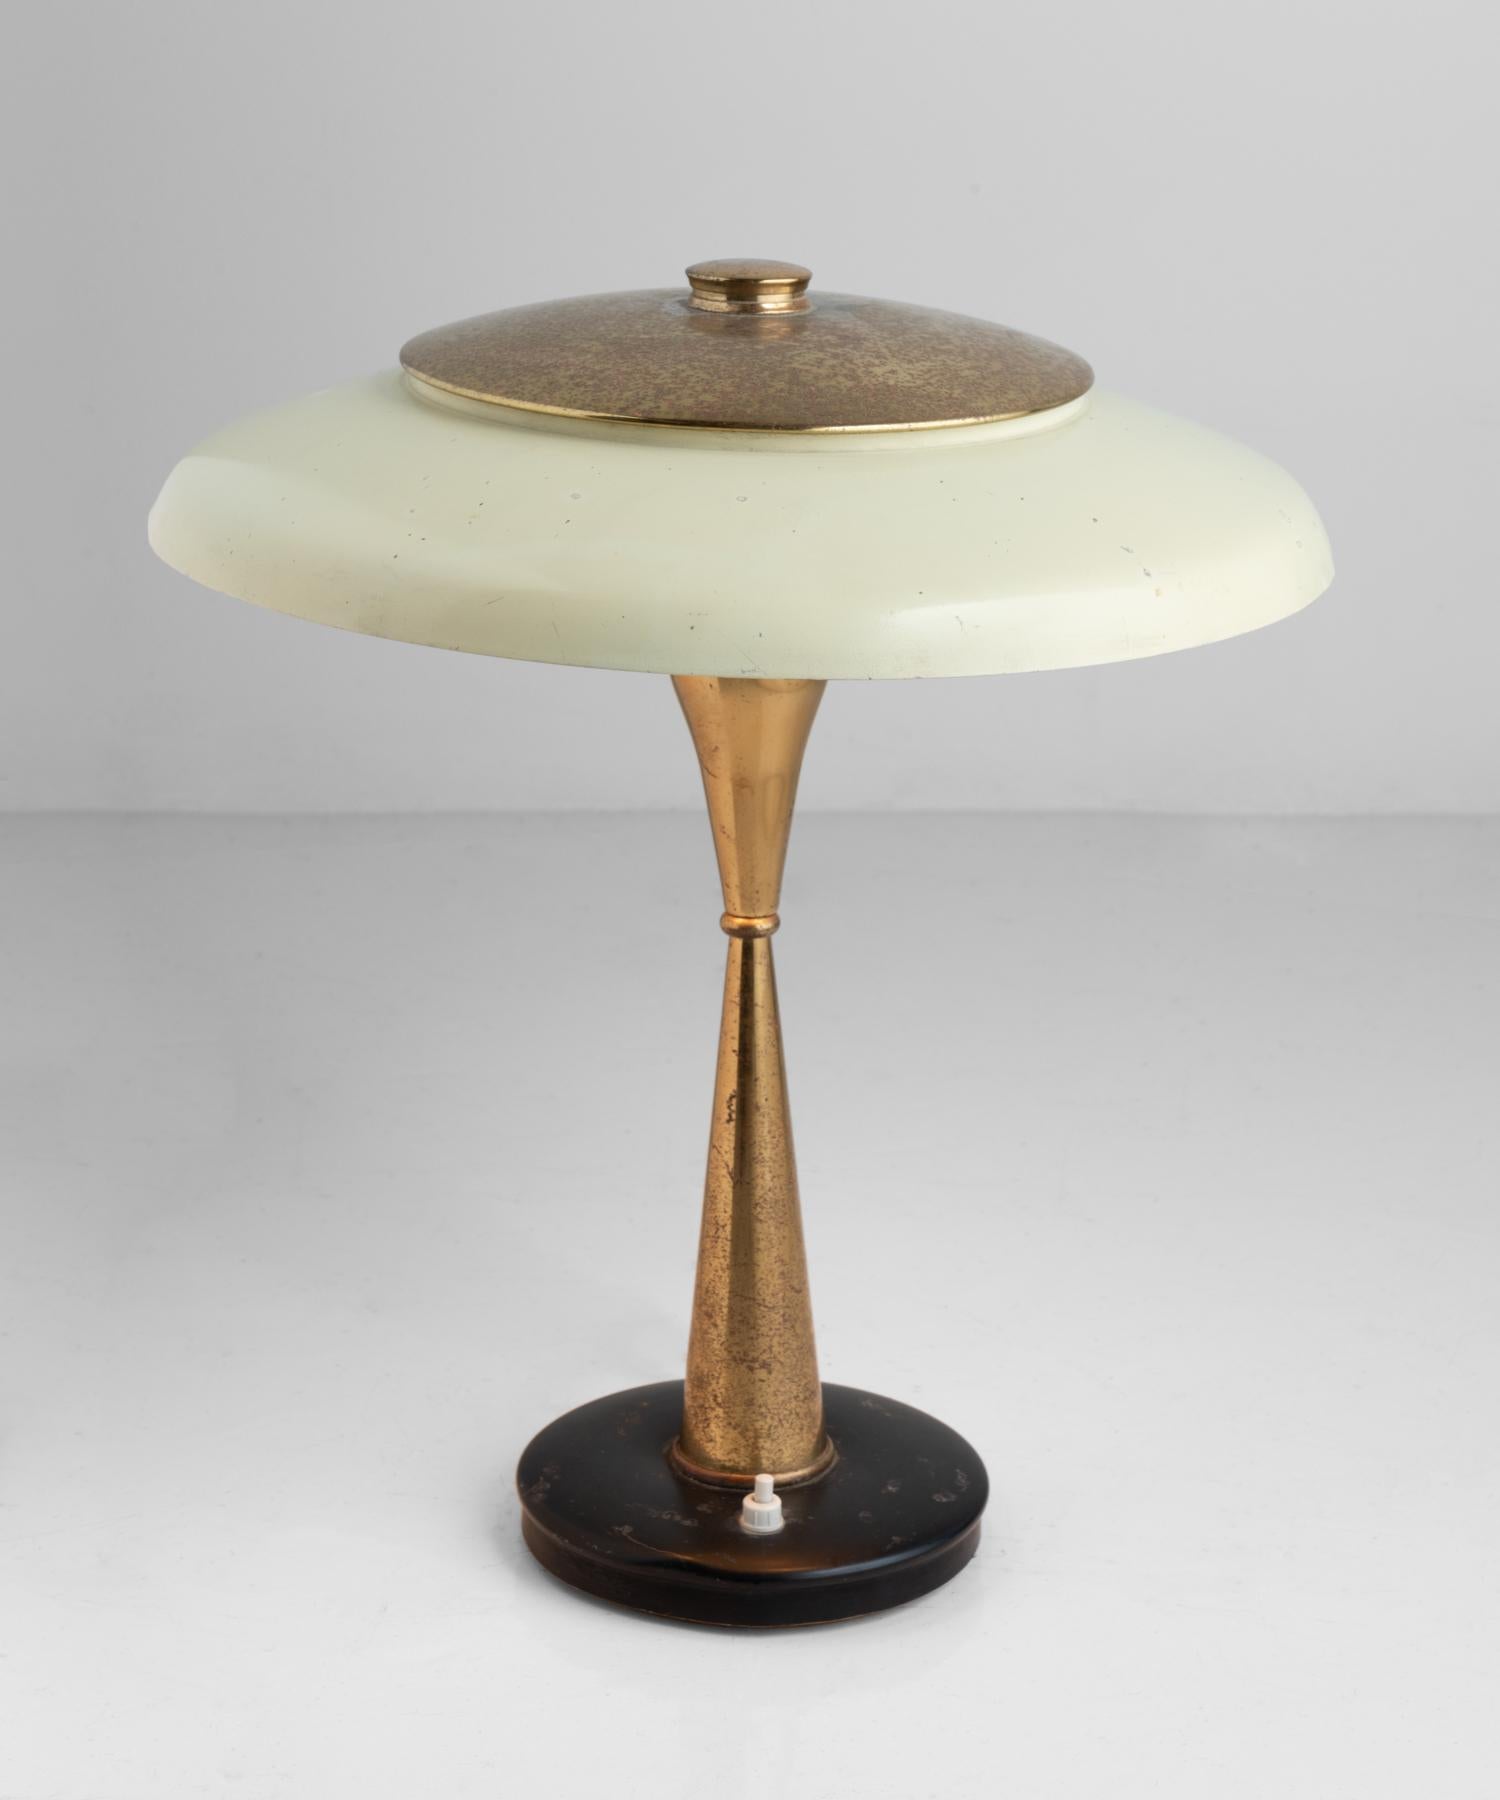 Oscar Torlasco Table Lamp, Italy circa 1950.

Designed by Oscar Tarlosco, Manufactured by Lumi. Made of brass and enameled metal, with articulating shade.